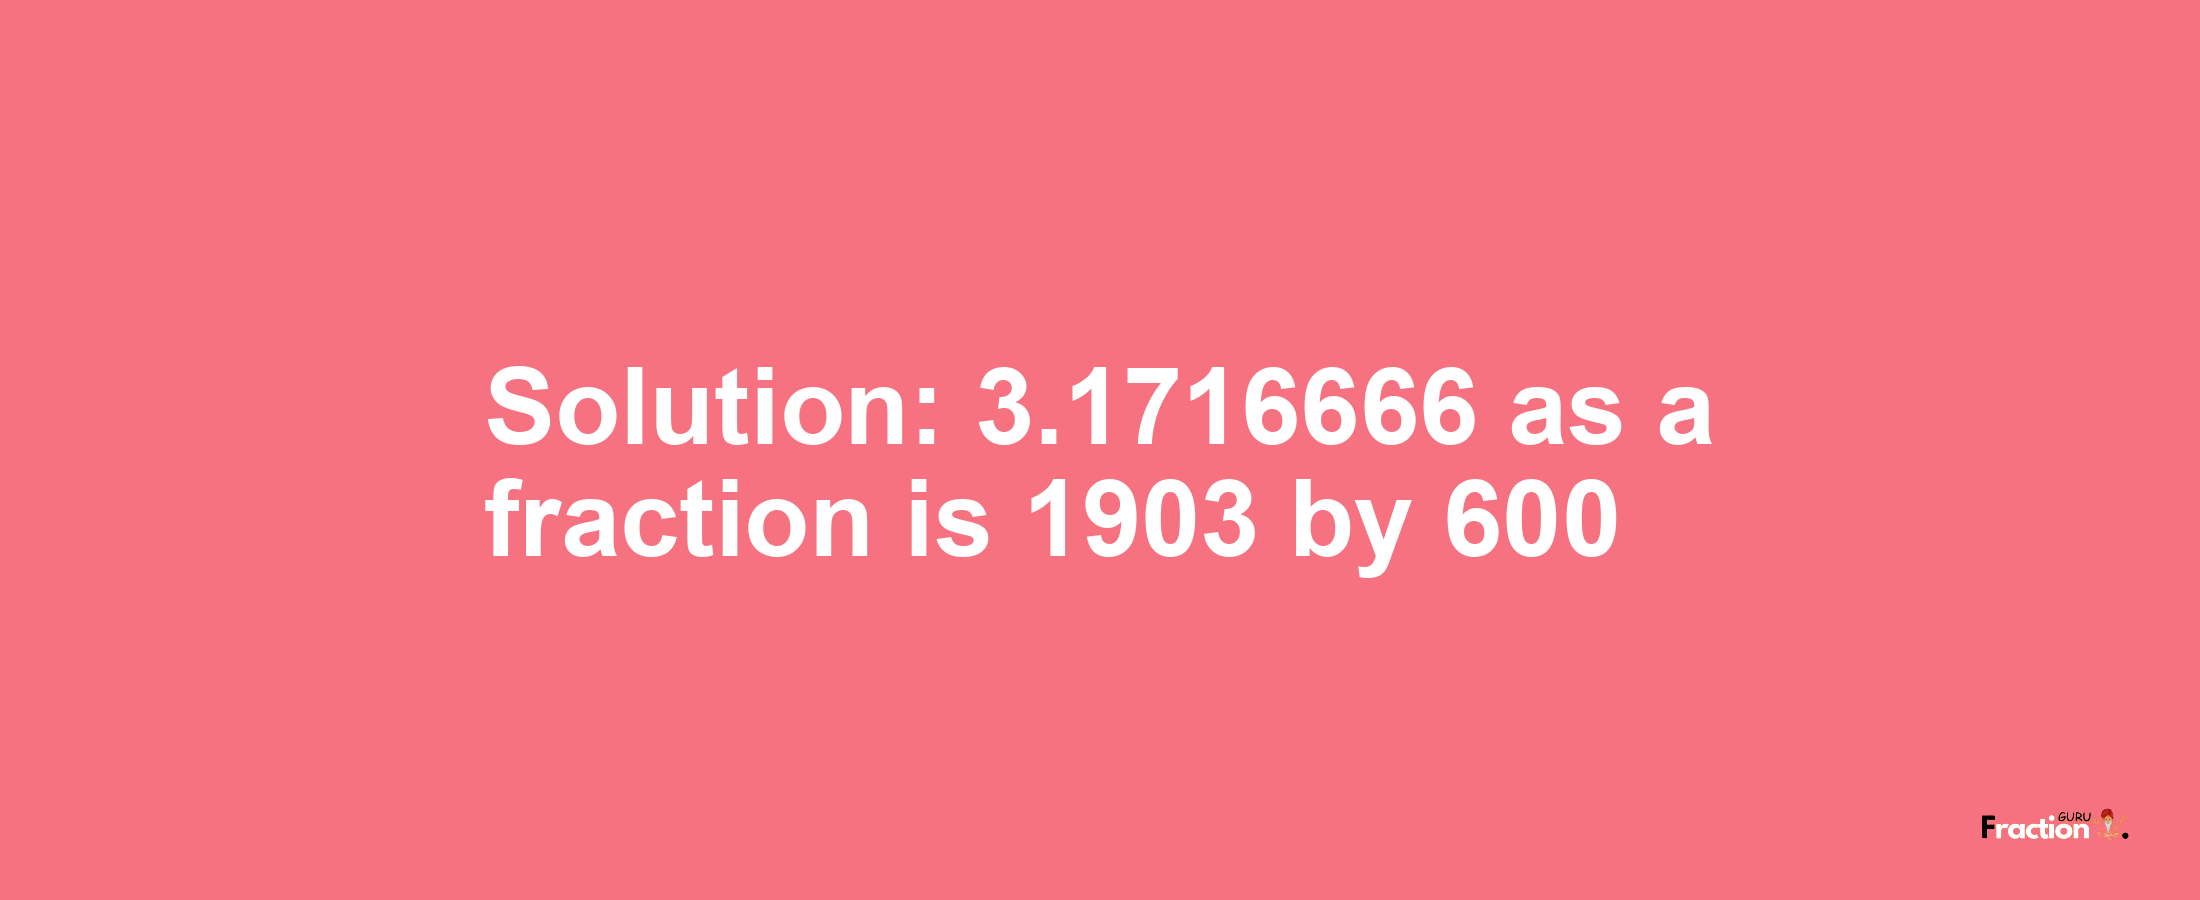 Solution:3.1716666 as a fraction is 1903/600